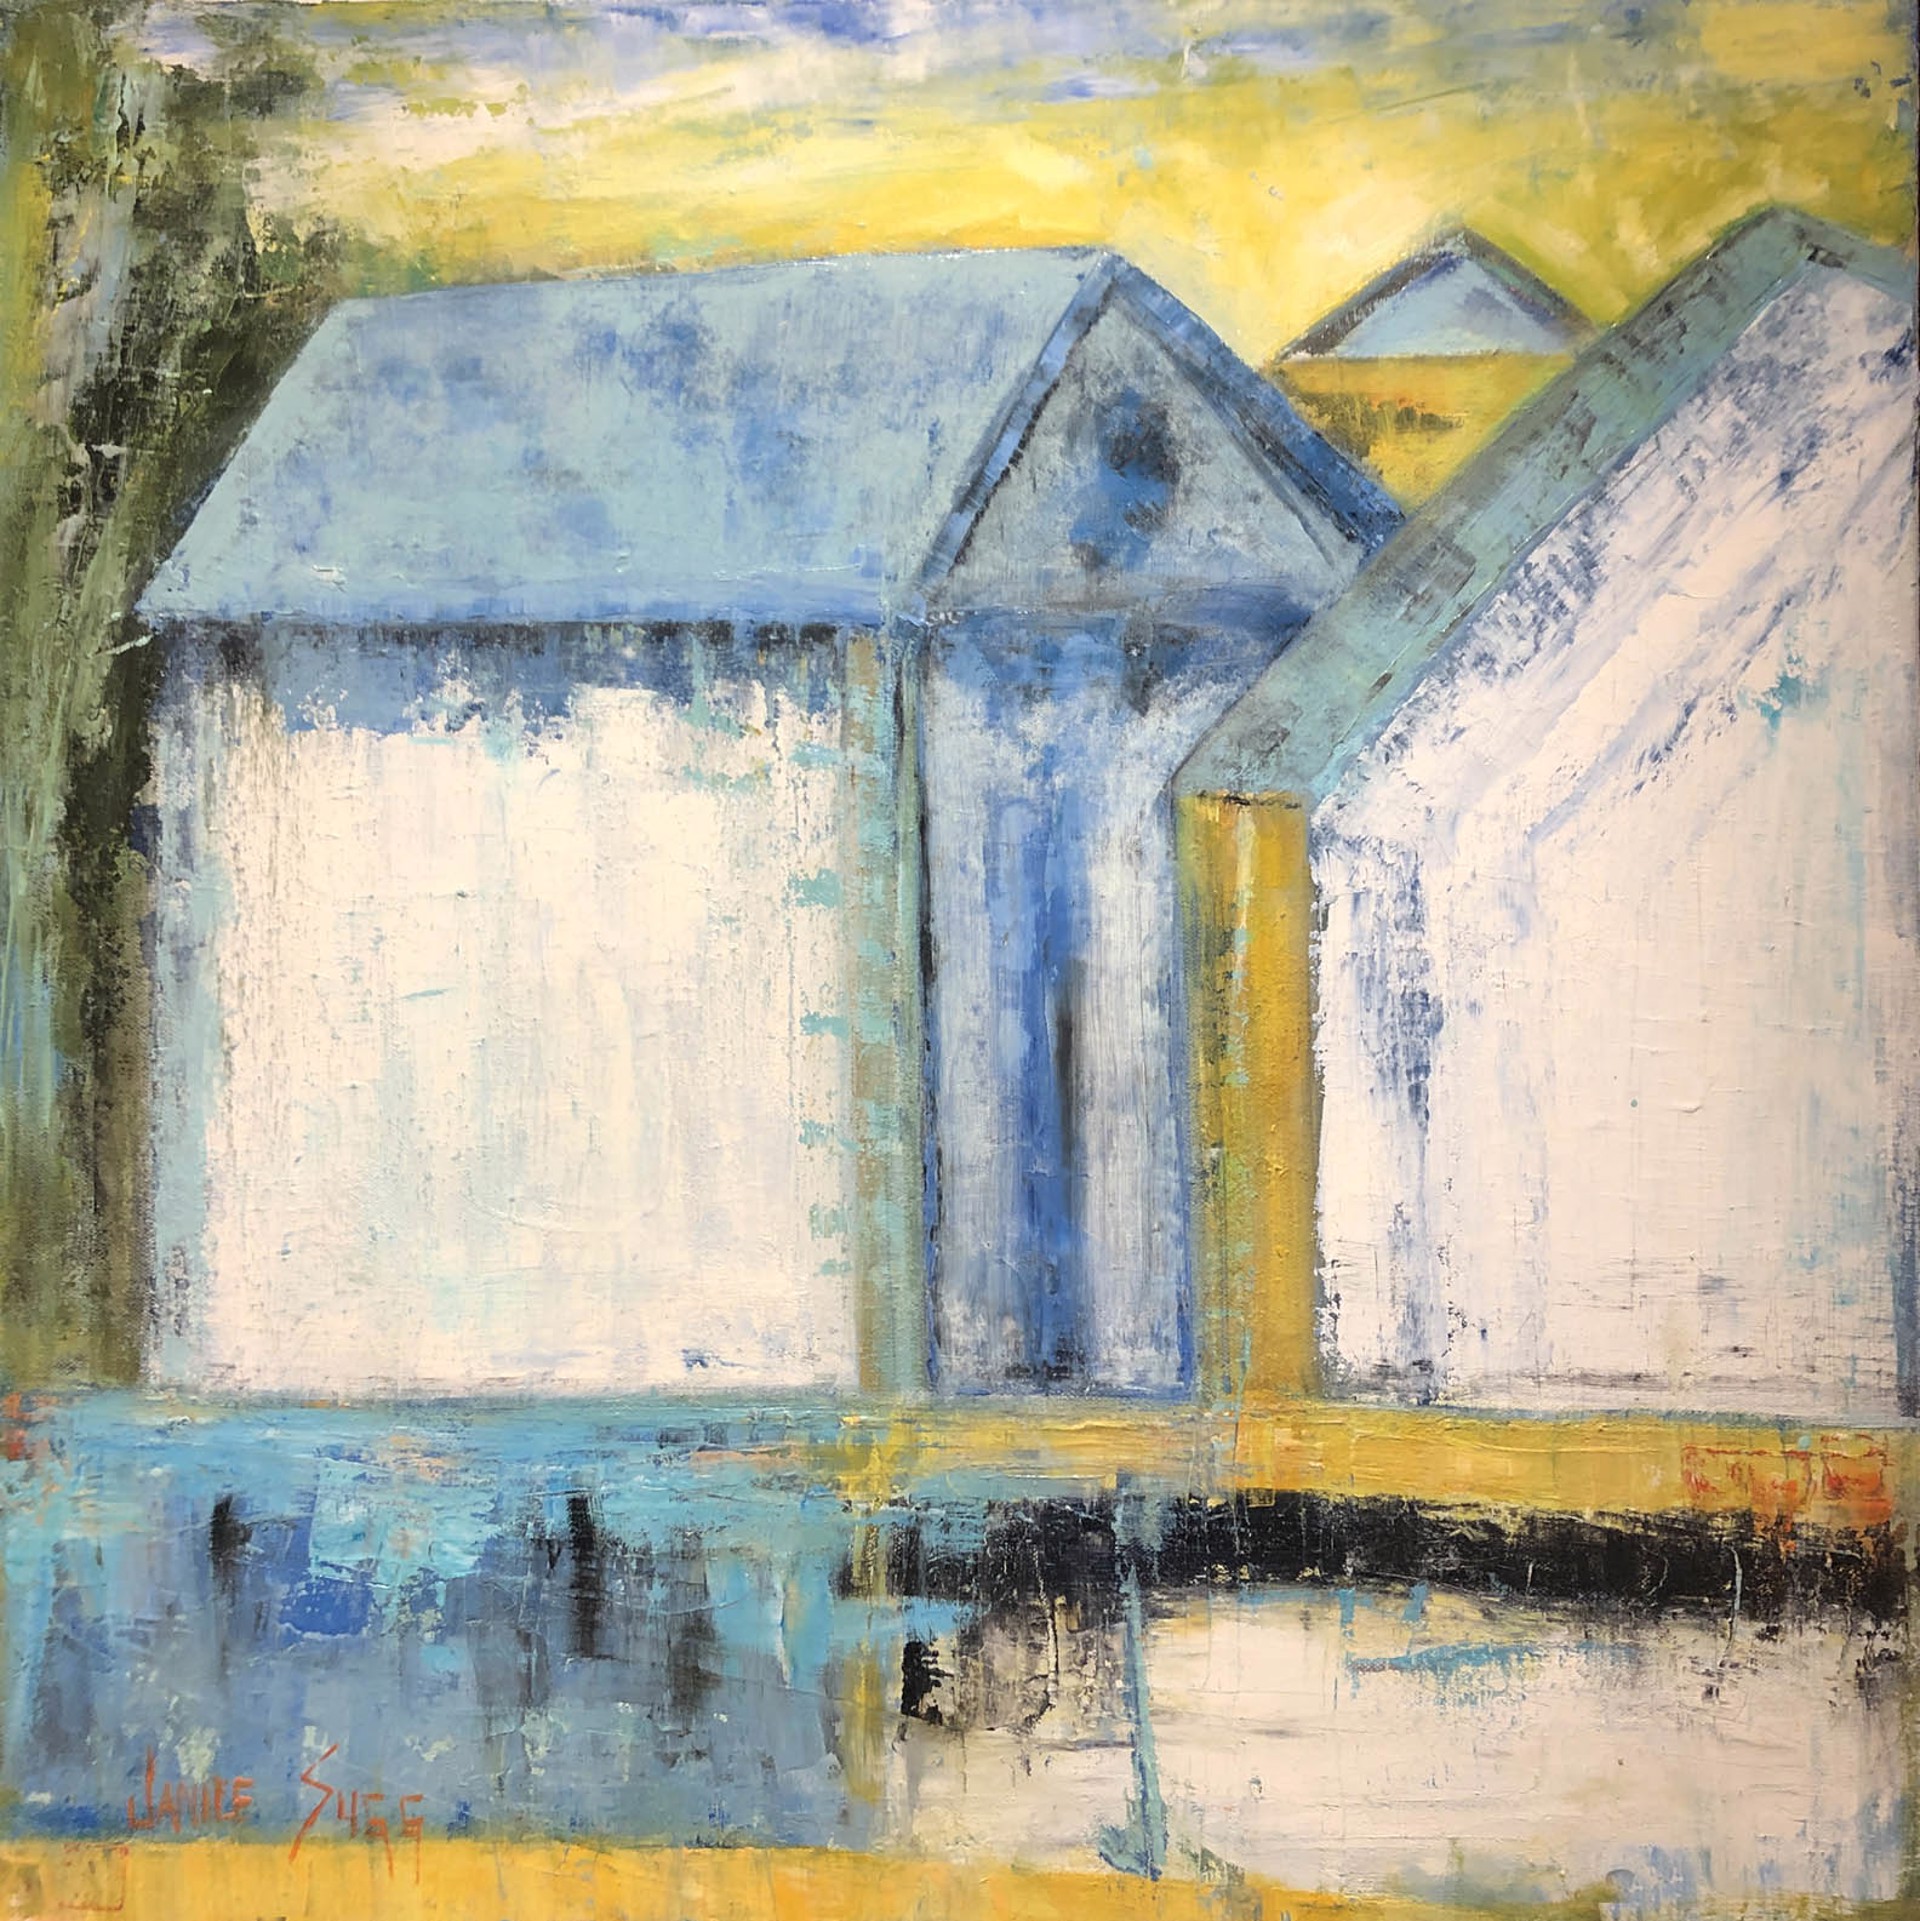 Blue Barn in White Light by Janice SUGG